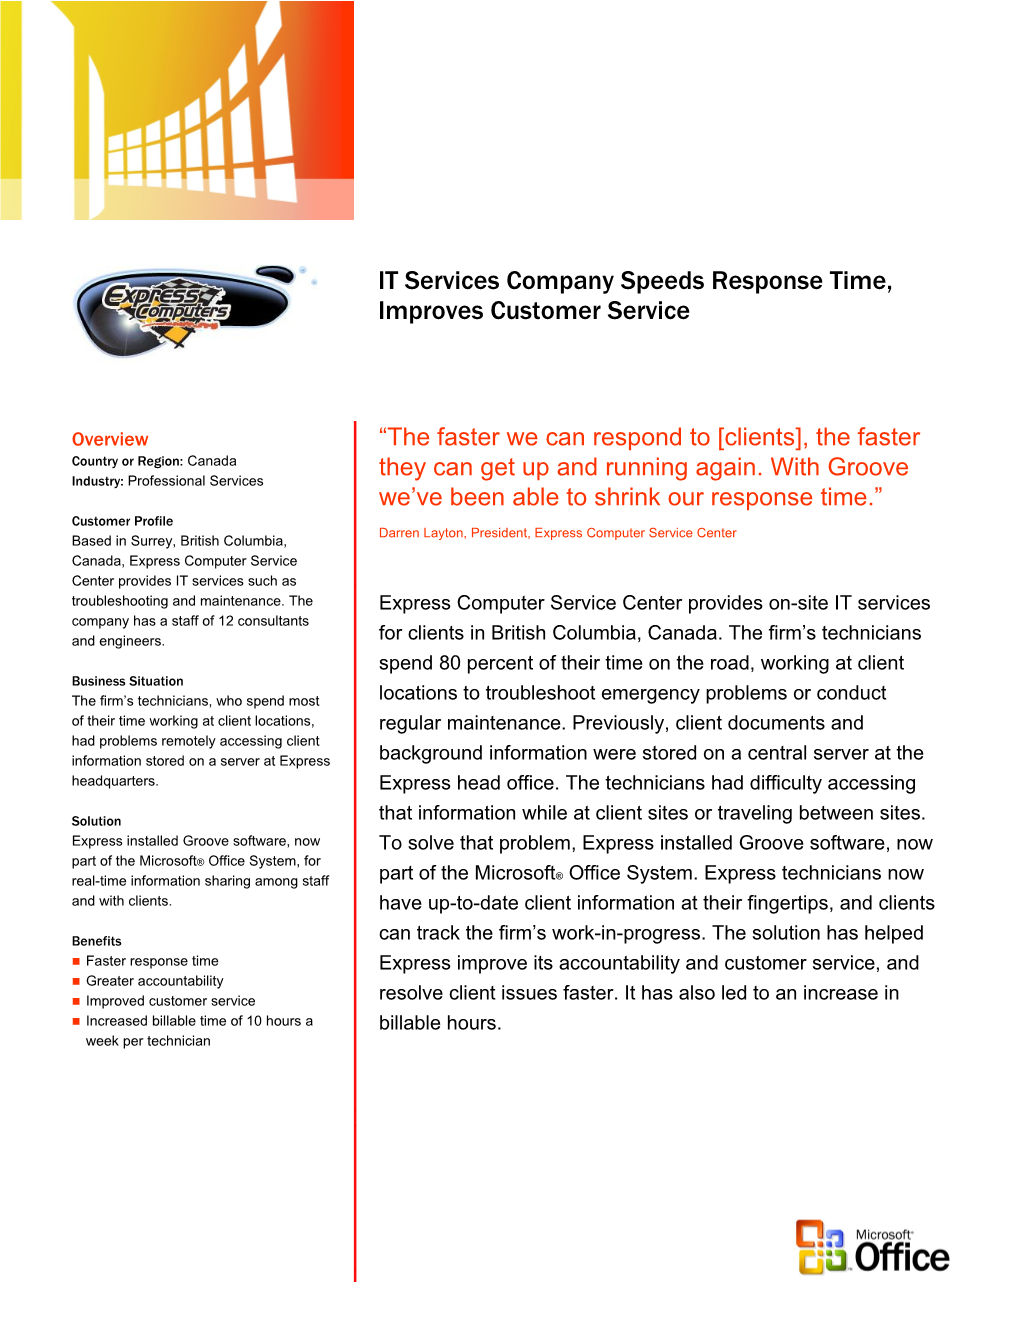 IT Services Company Speeds Response Time, Improves Customer Service